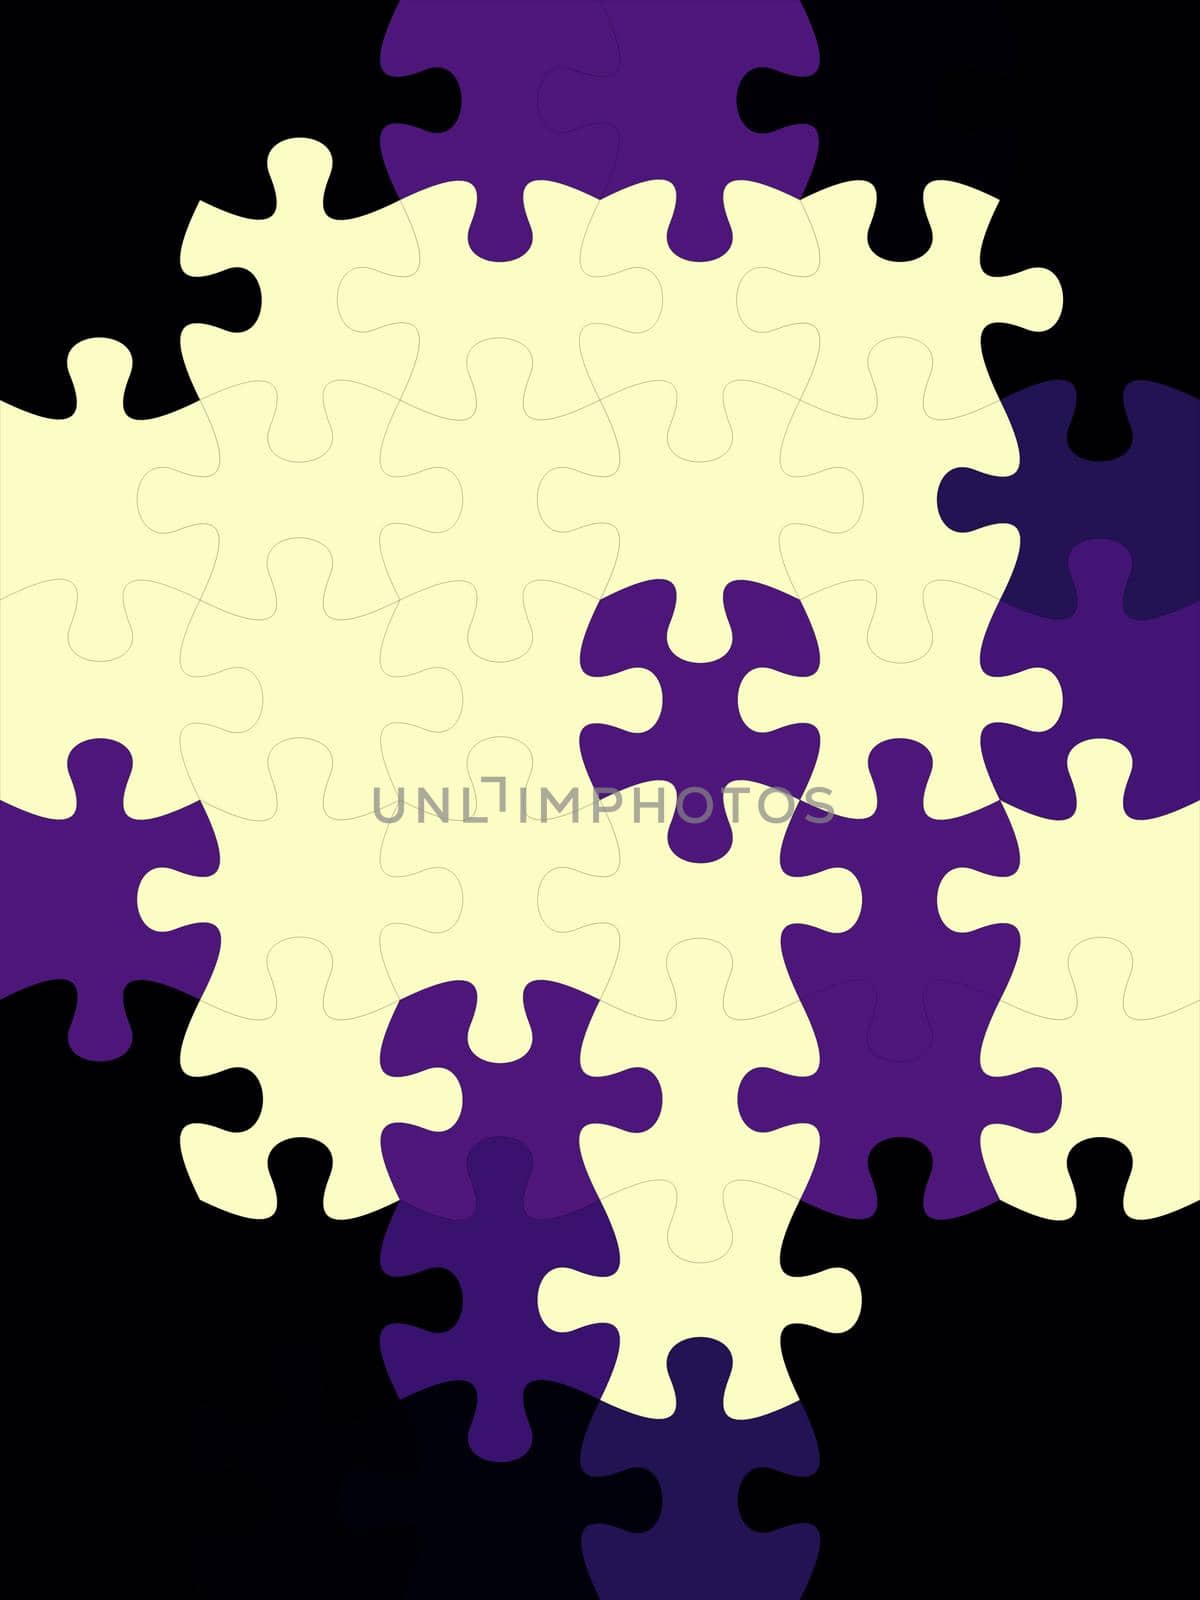 Connected blank puzzle pieces in two different colors digitally created in black isolated background by tabishere